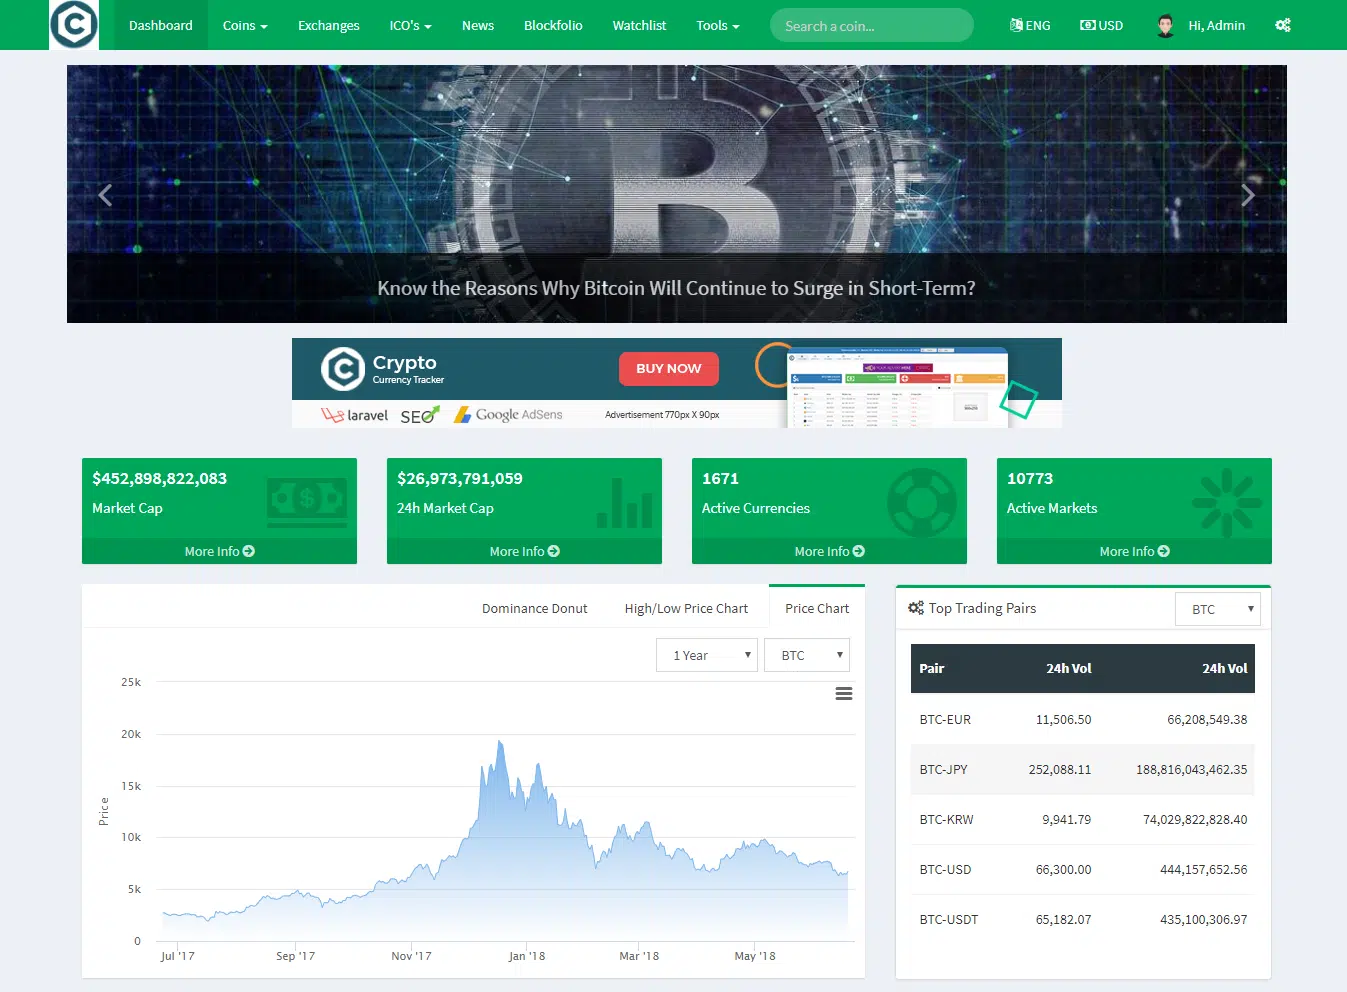 Crypto Currency Tracker v7.1 - prices, charts, news, ICO of cryptocurrencies